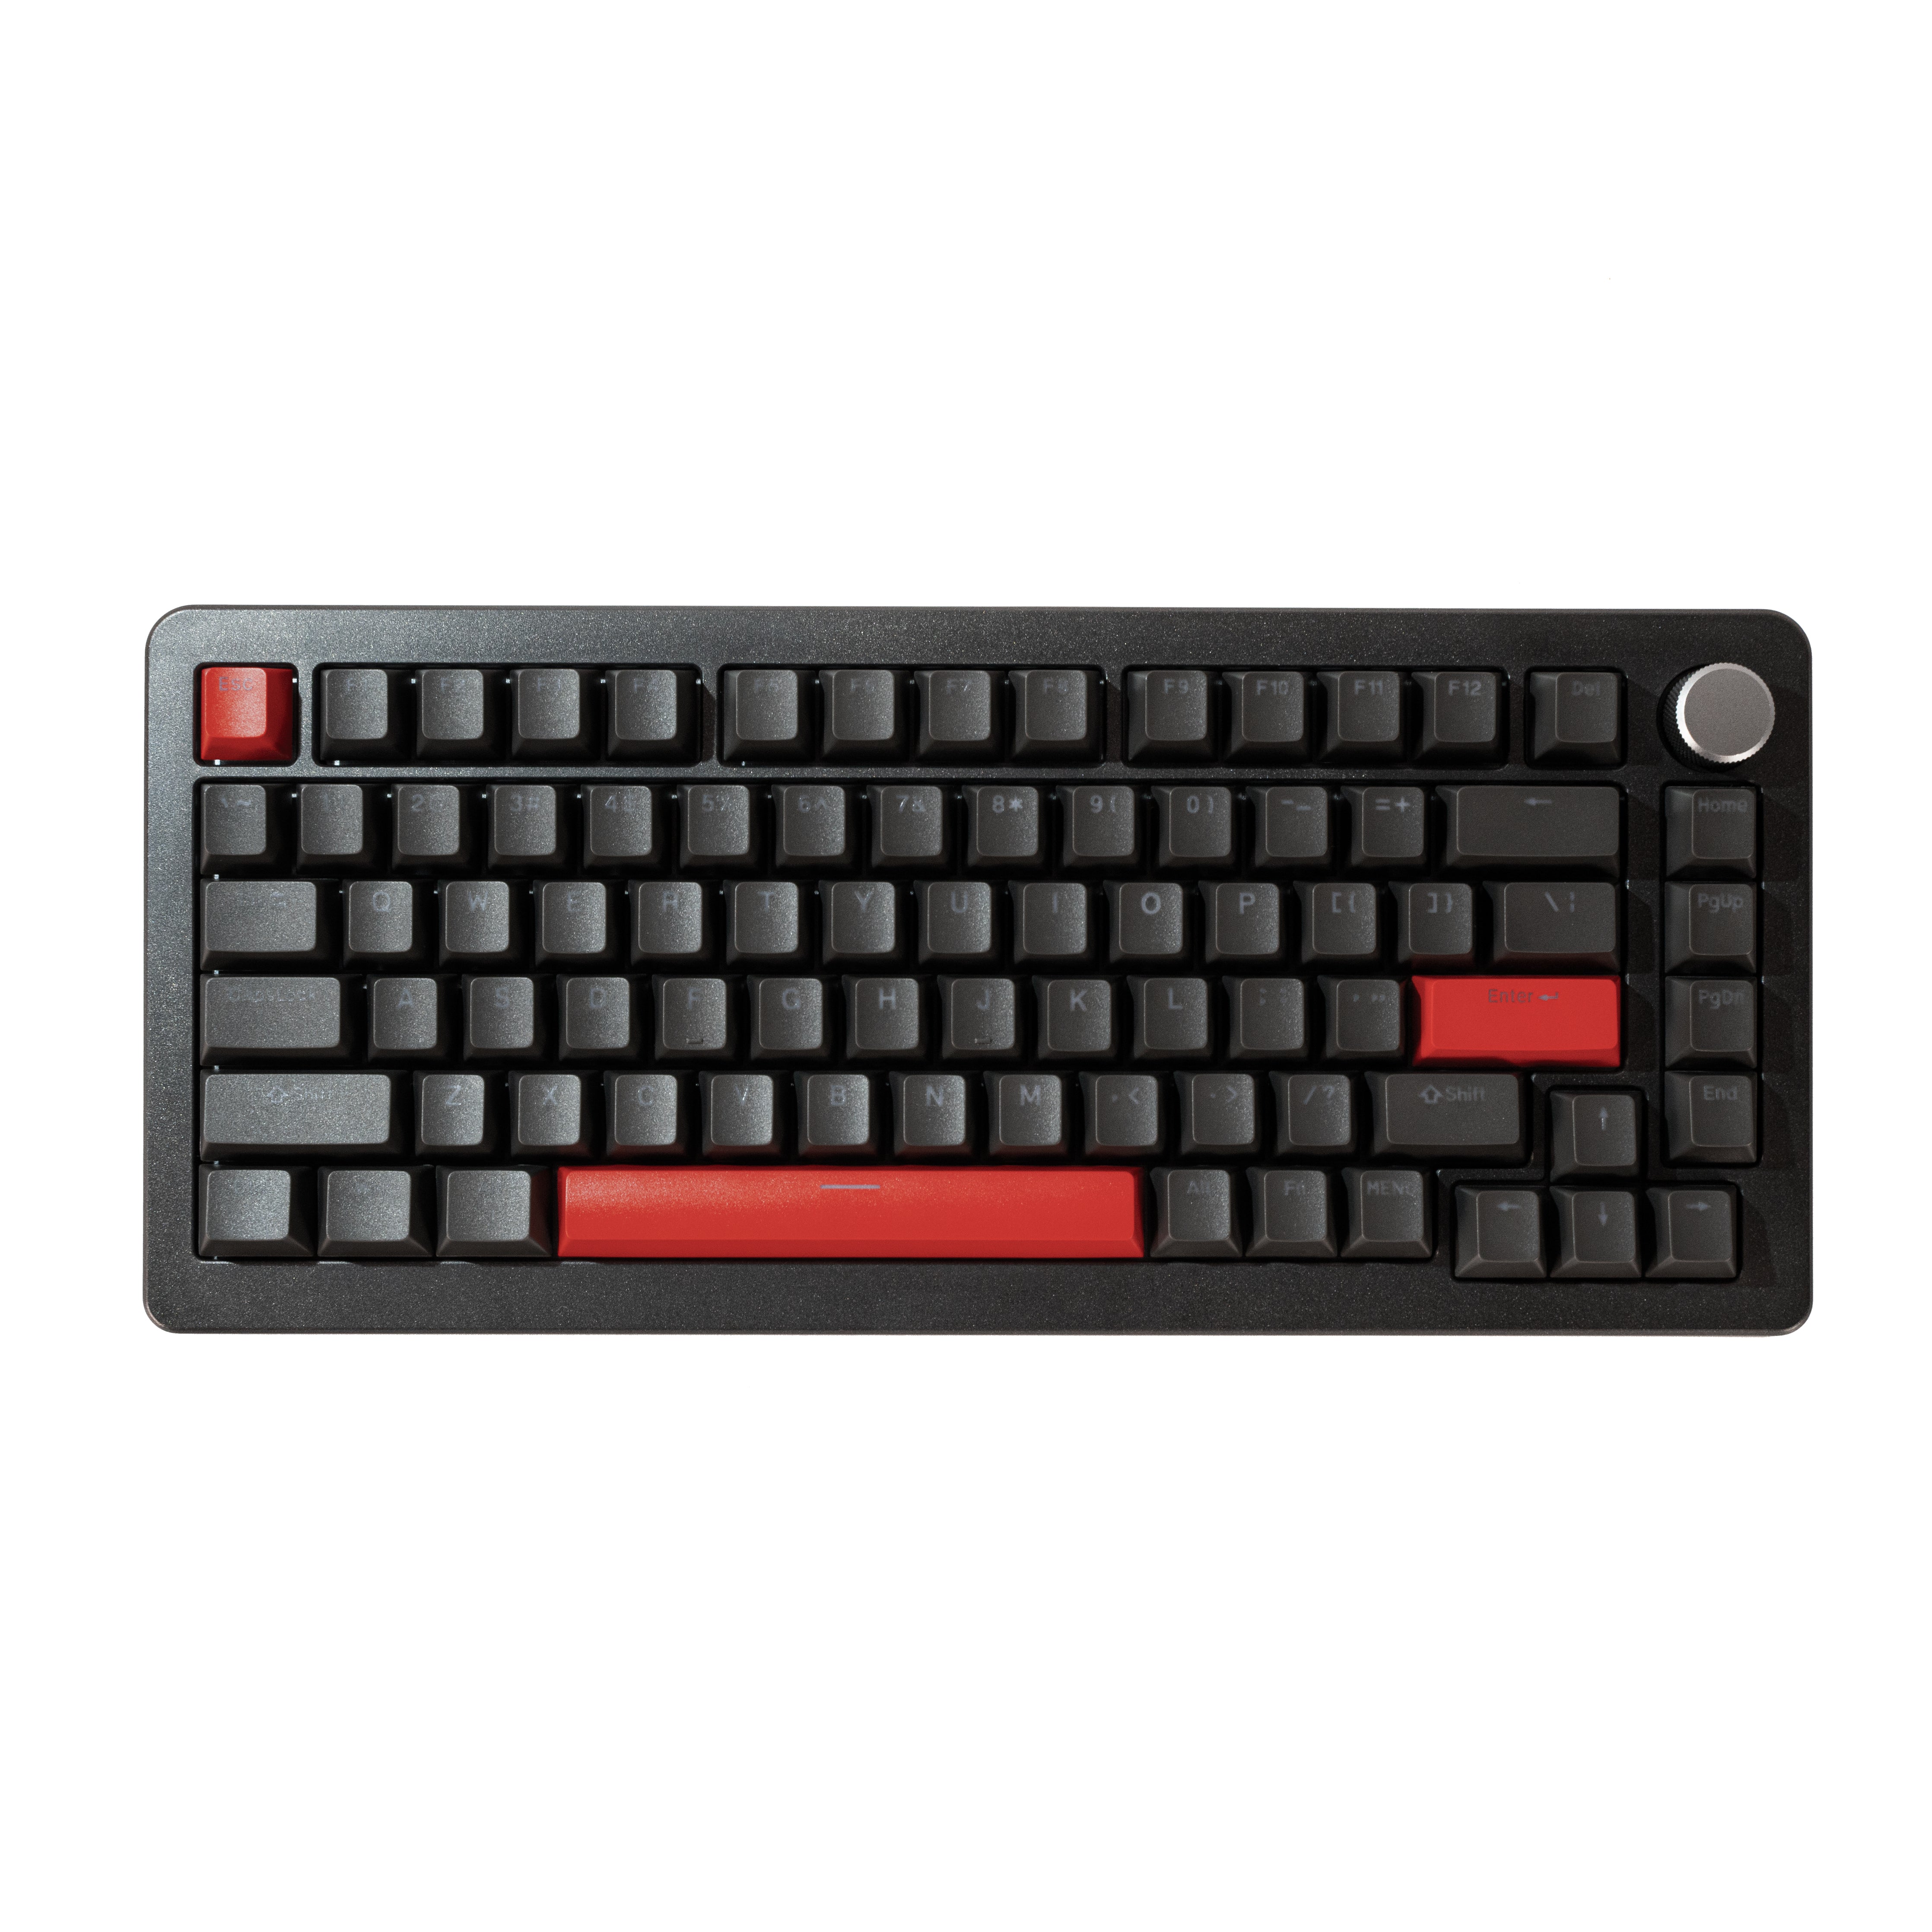 DrunkDeer A75 Pro - Wired Actuation-Distance-Adjustable Magnetic Switch Keyboard